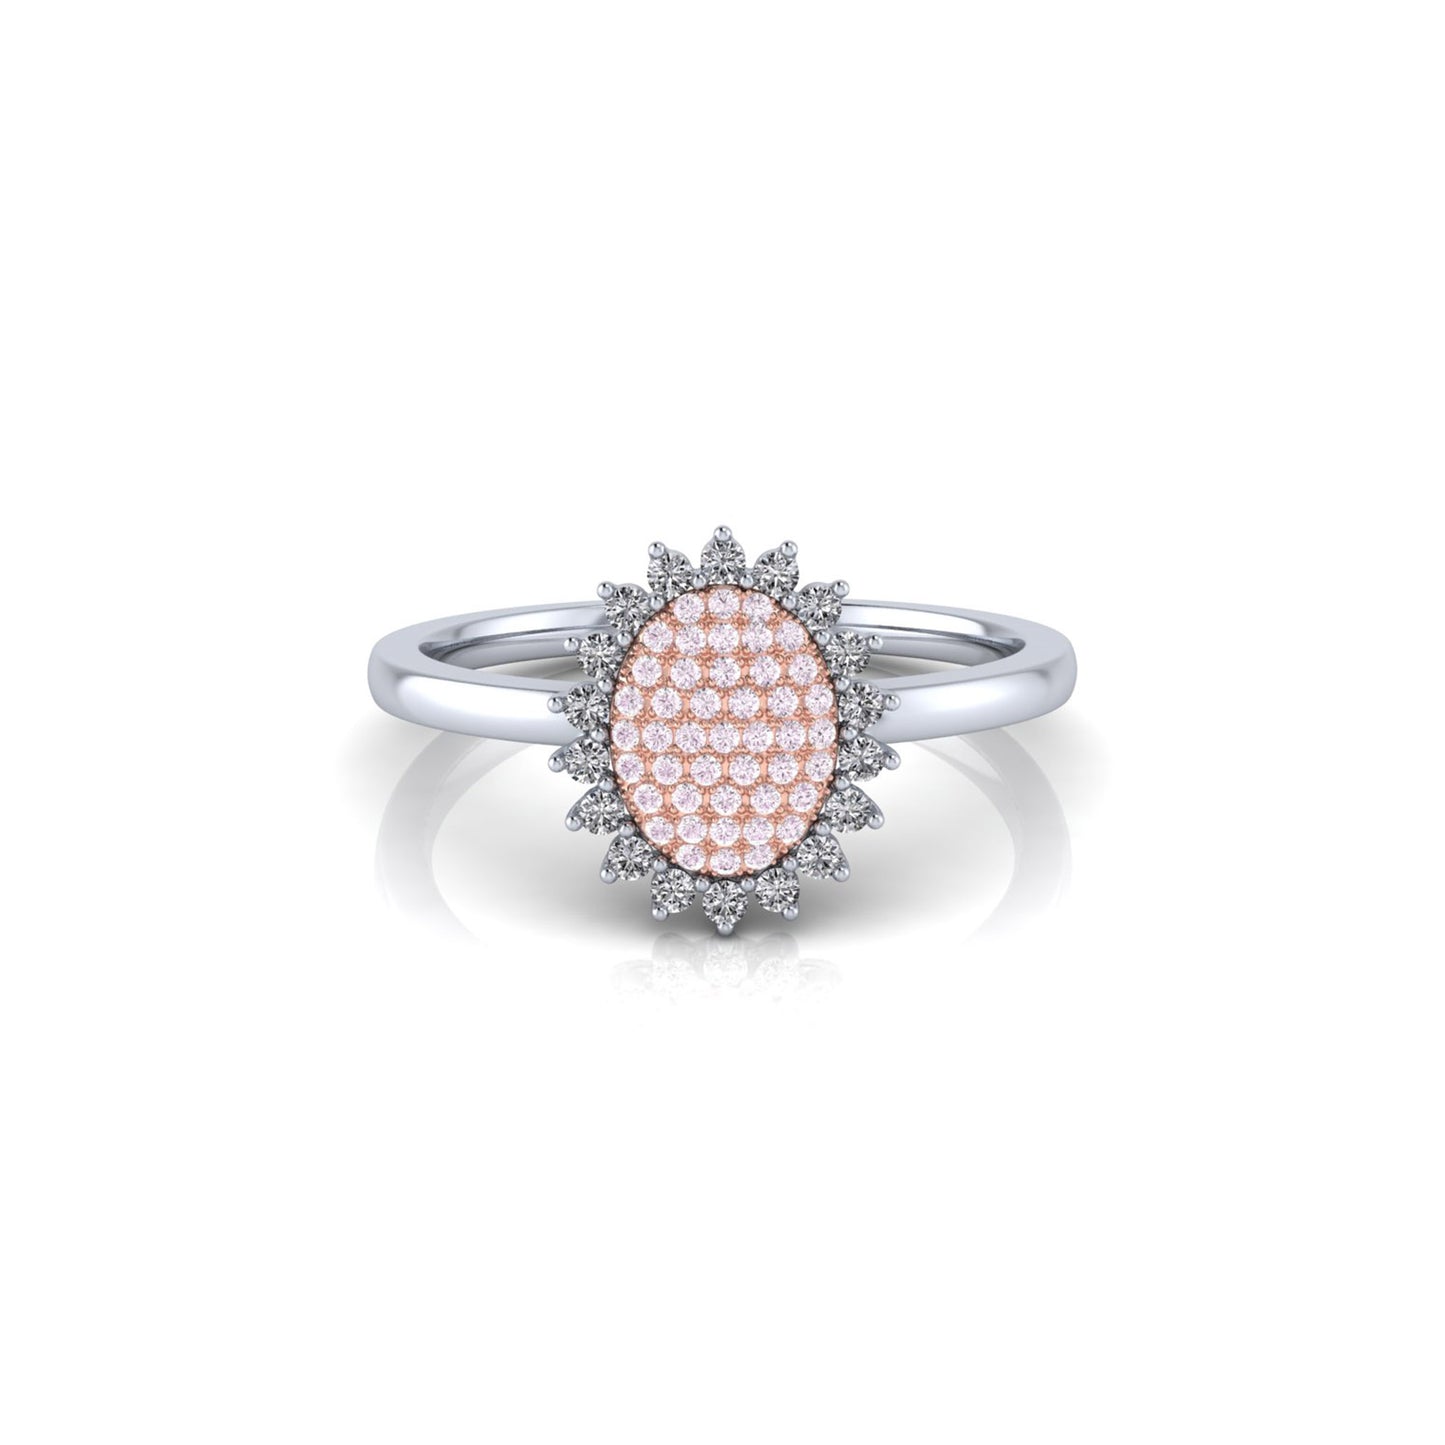 Eminence Pinks Sunflower Oval Pave Ring